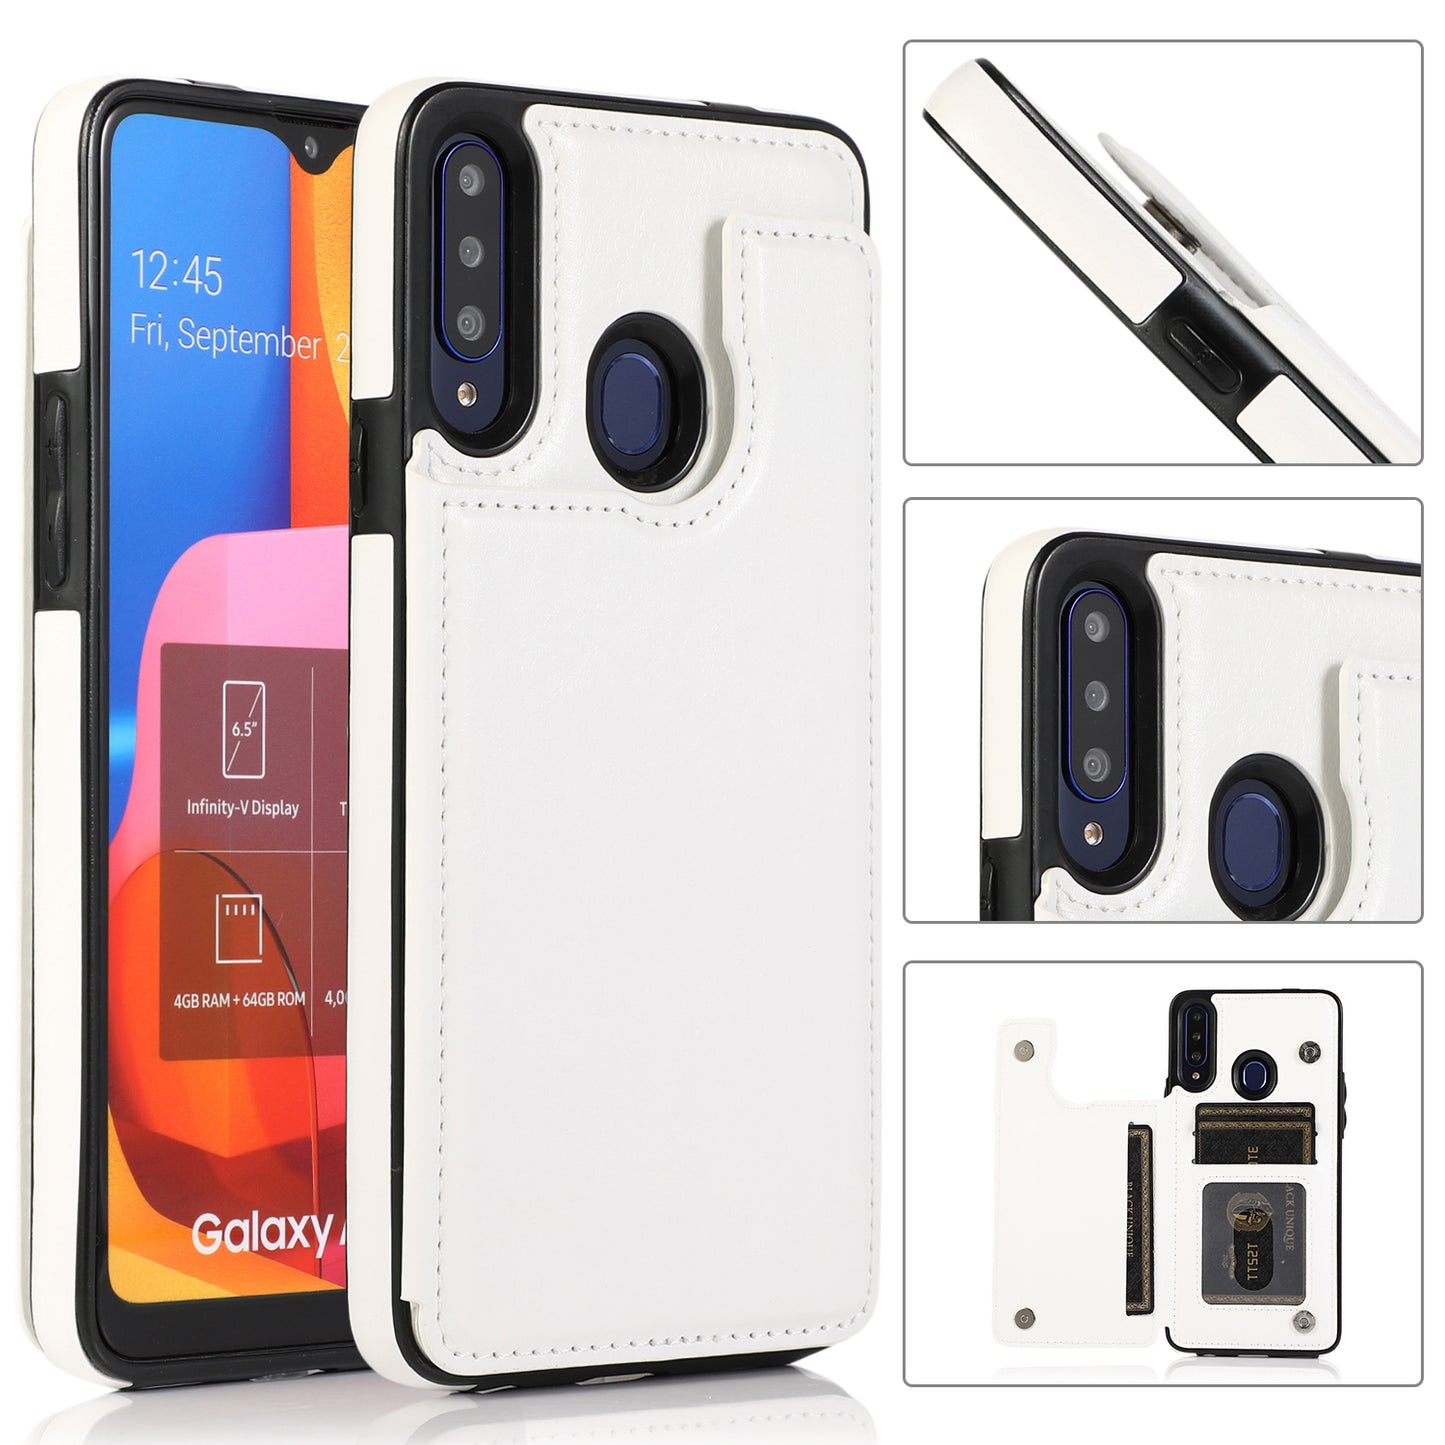 Samsung Galaxy A20s Leather Cover Double Buckles Shock Resistant Multiple Card Slots Magnetic Fold Pocket